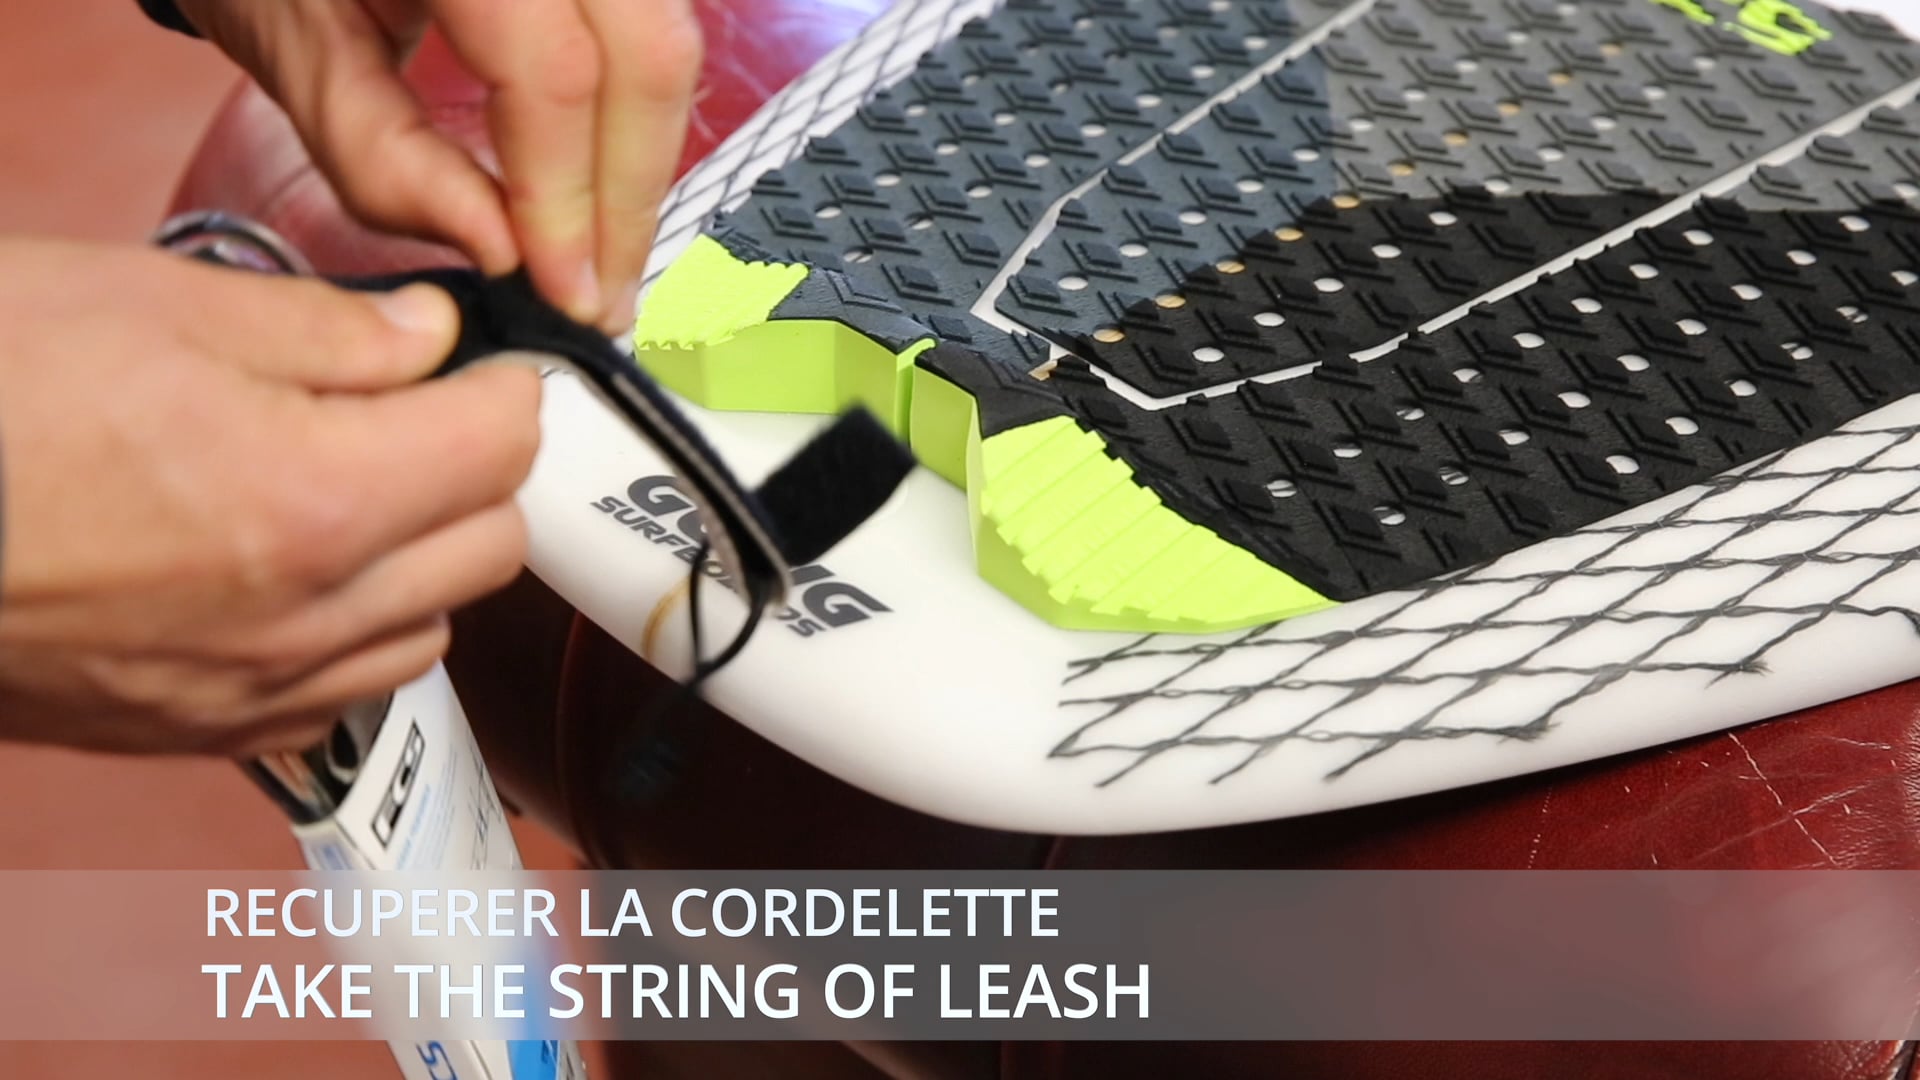 HOW TO INSTALL YOUR LEASH / COMMENT INSTALLER VOTRE LEASH GONG SURFBOARDS | aquasport.tv